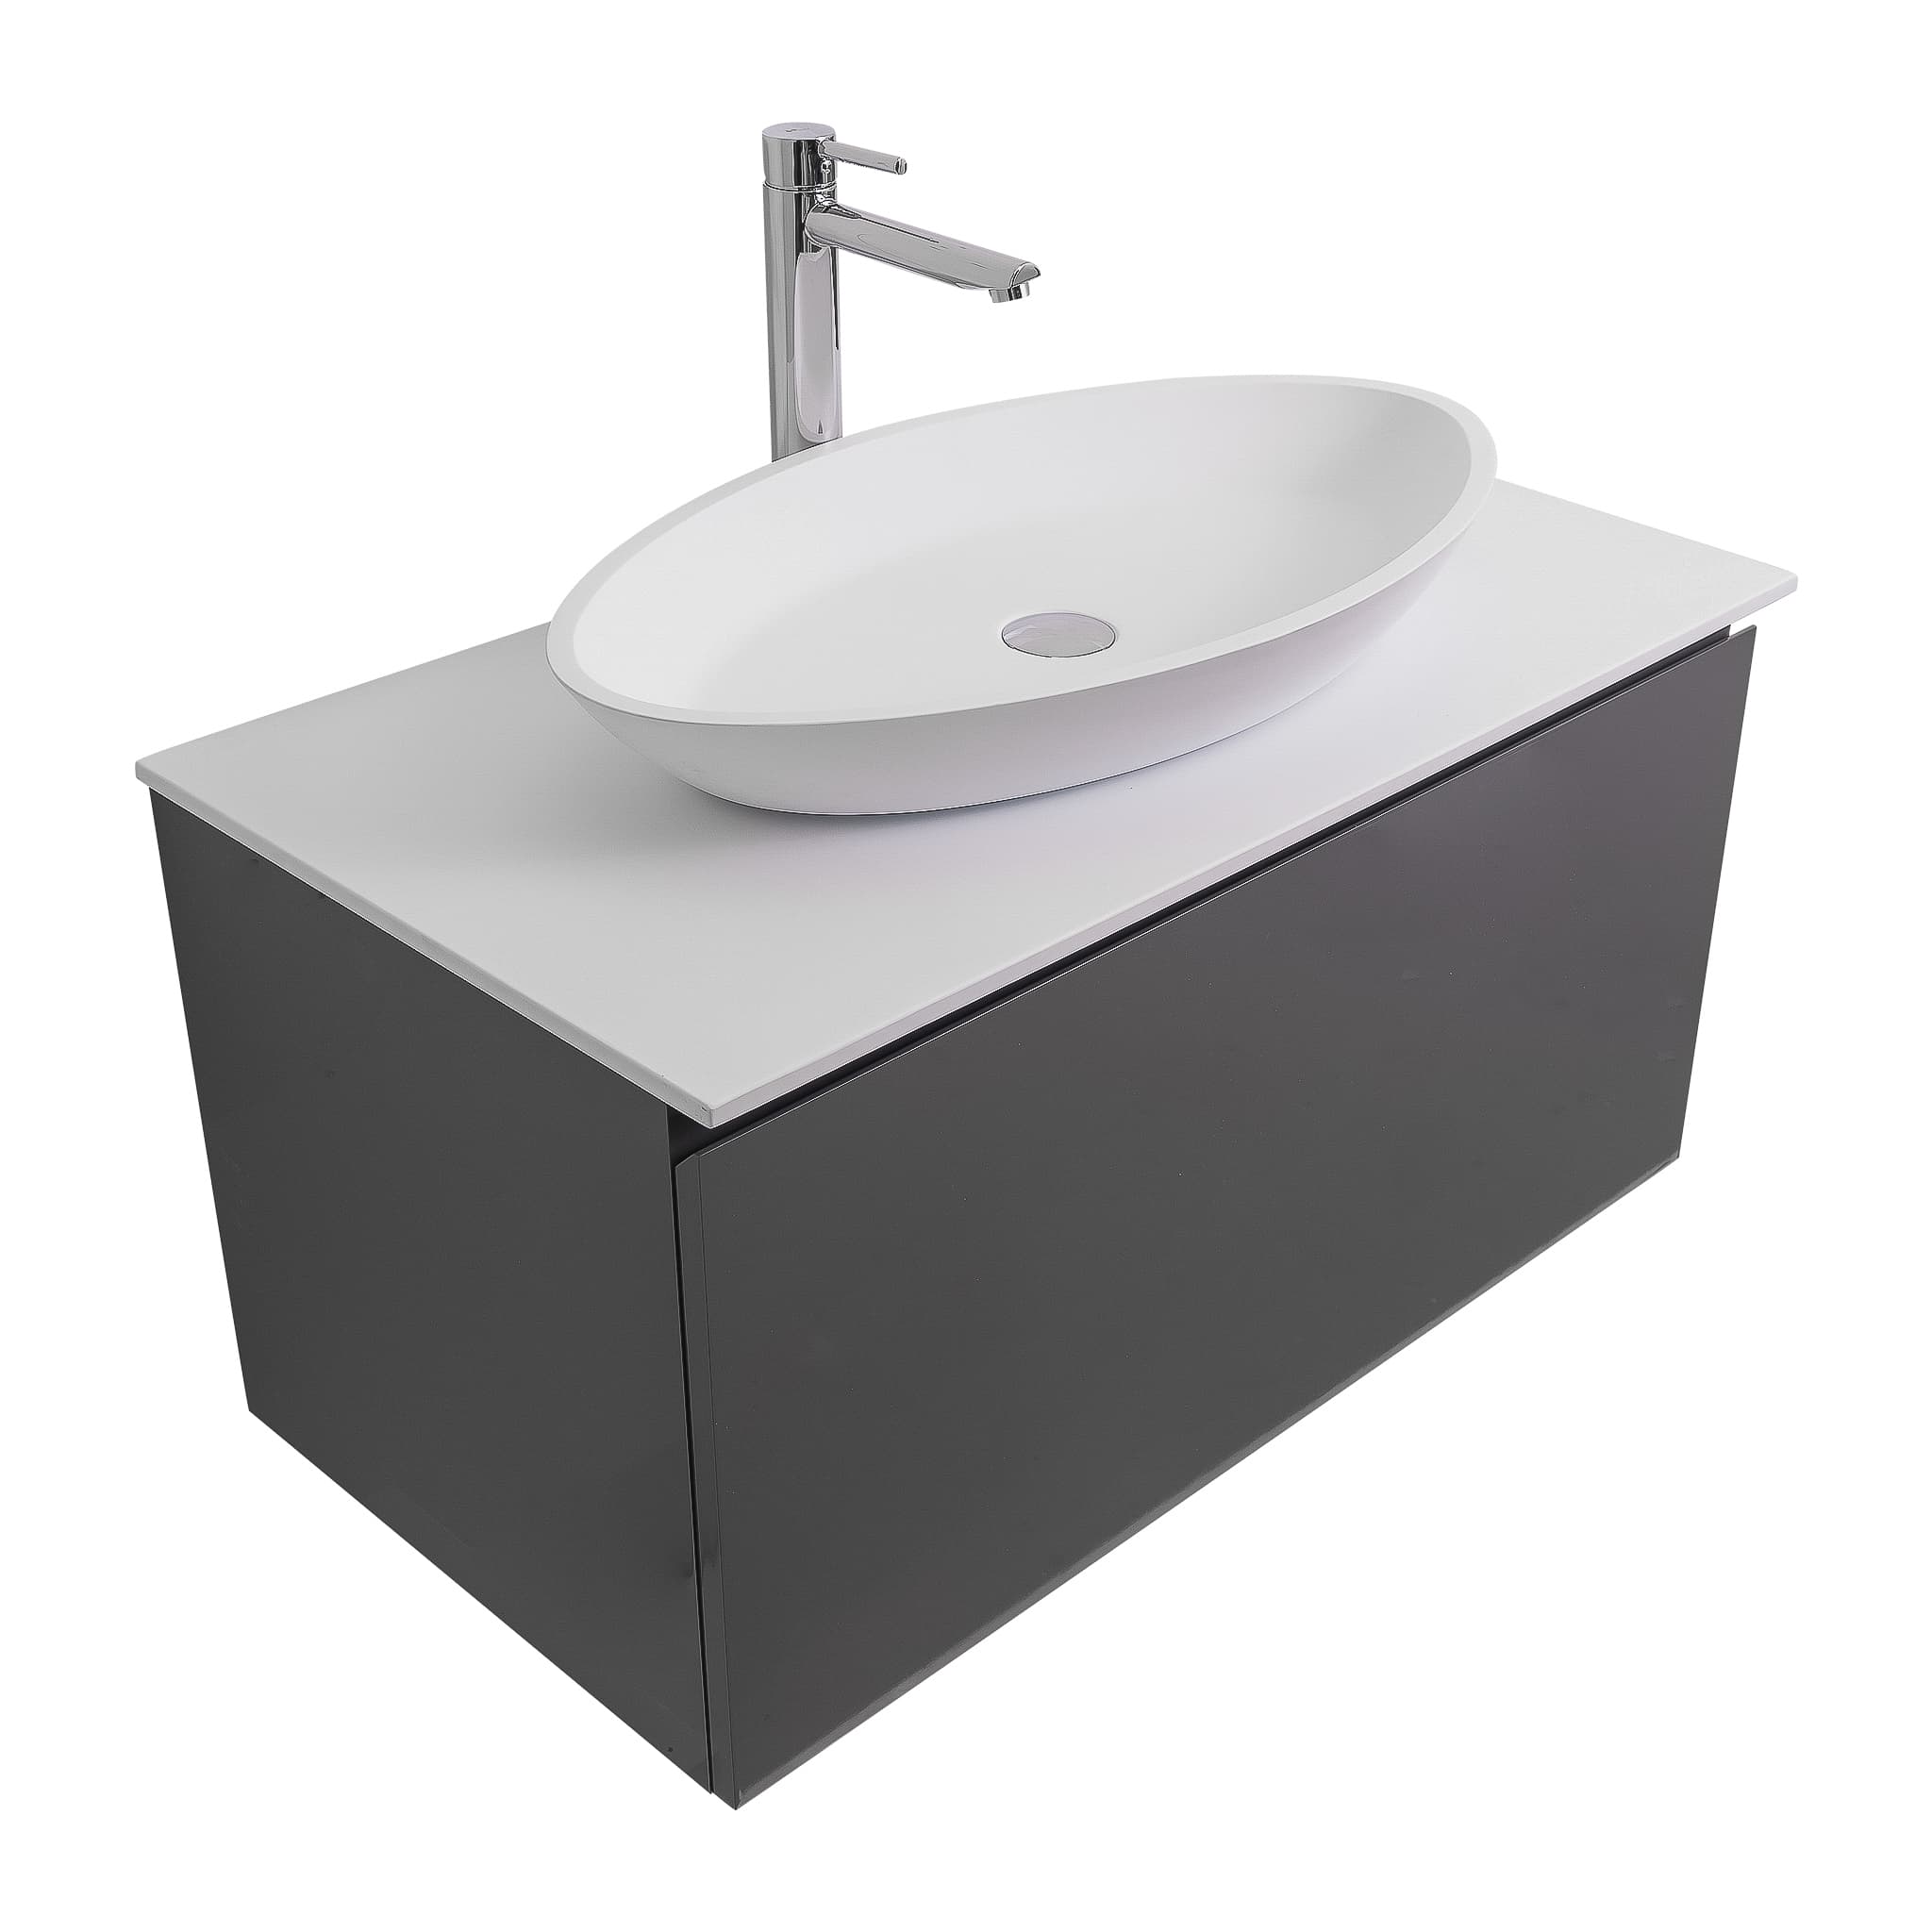 Venice 31.5 Anthracite High Gloss Cabinet, Solid Surface Flat White Counter And Oval Solid Surface White Basin 1305, Wall Mounted Modern Vanity Set